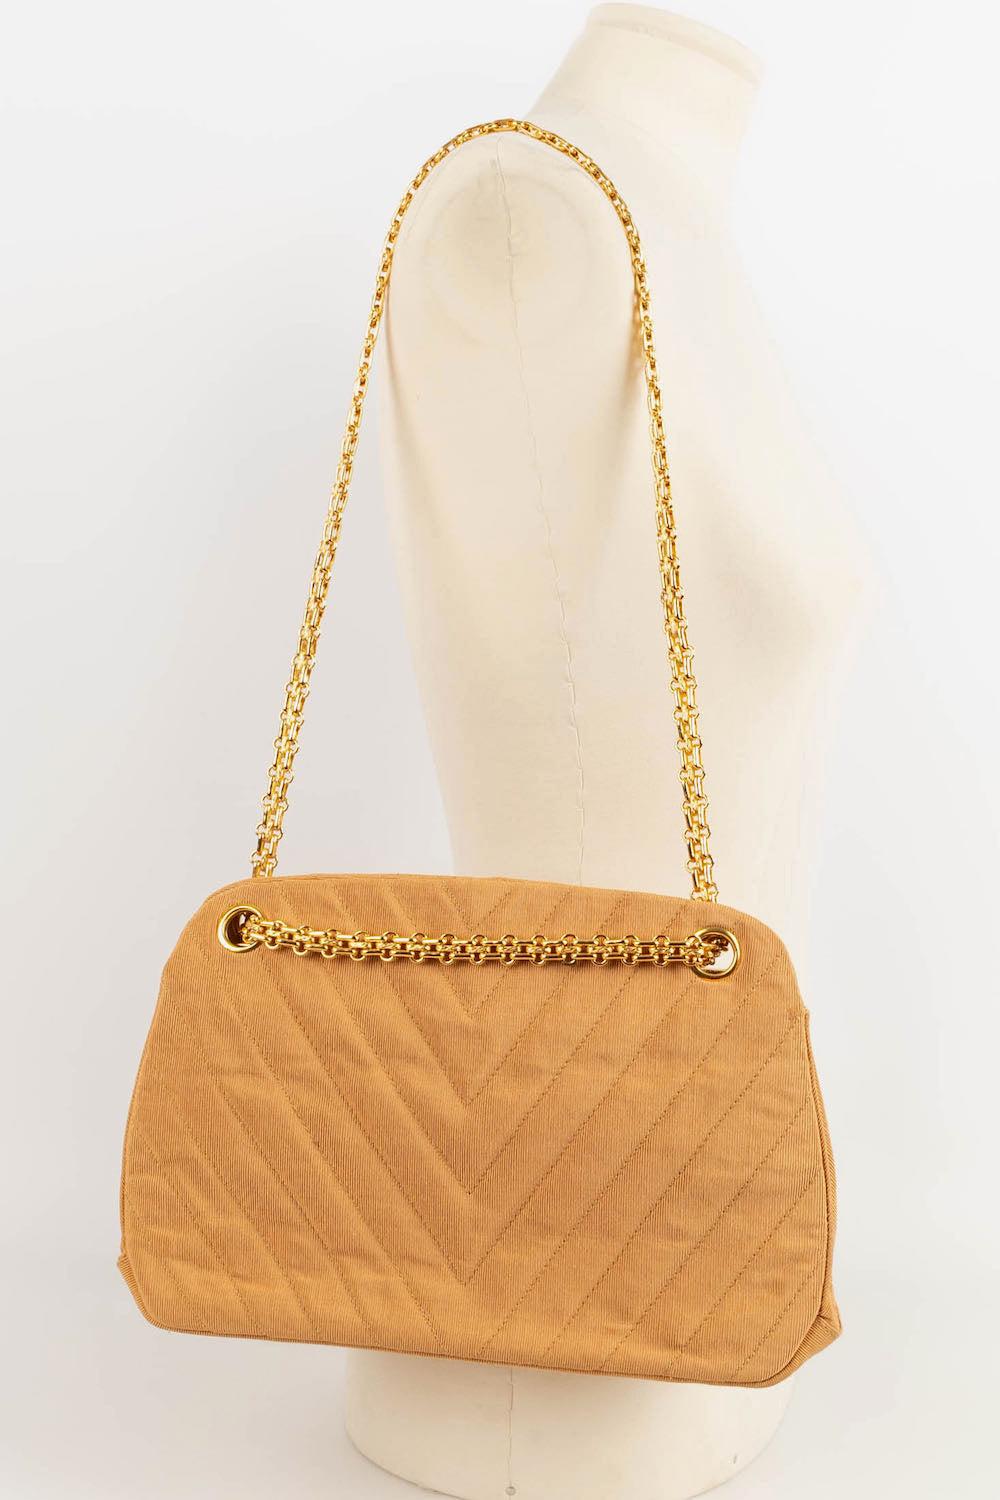 Chanel Bag in Fabric with Gold Metal Chain 5